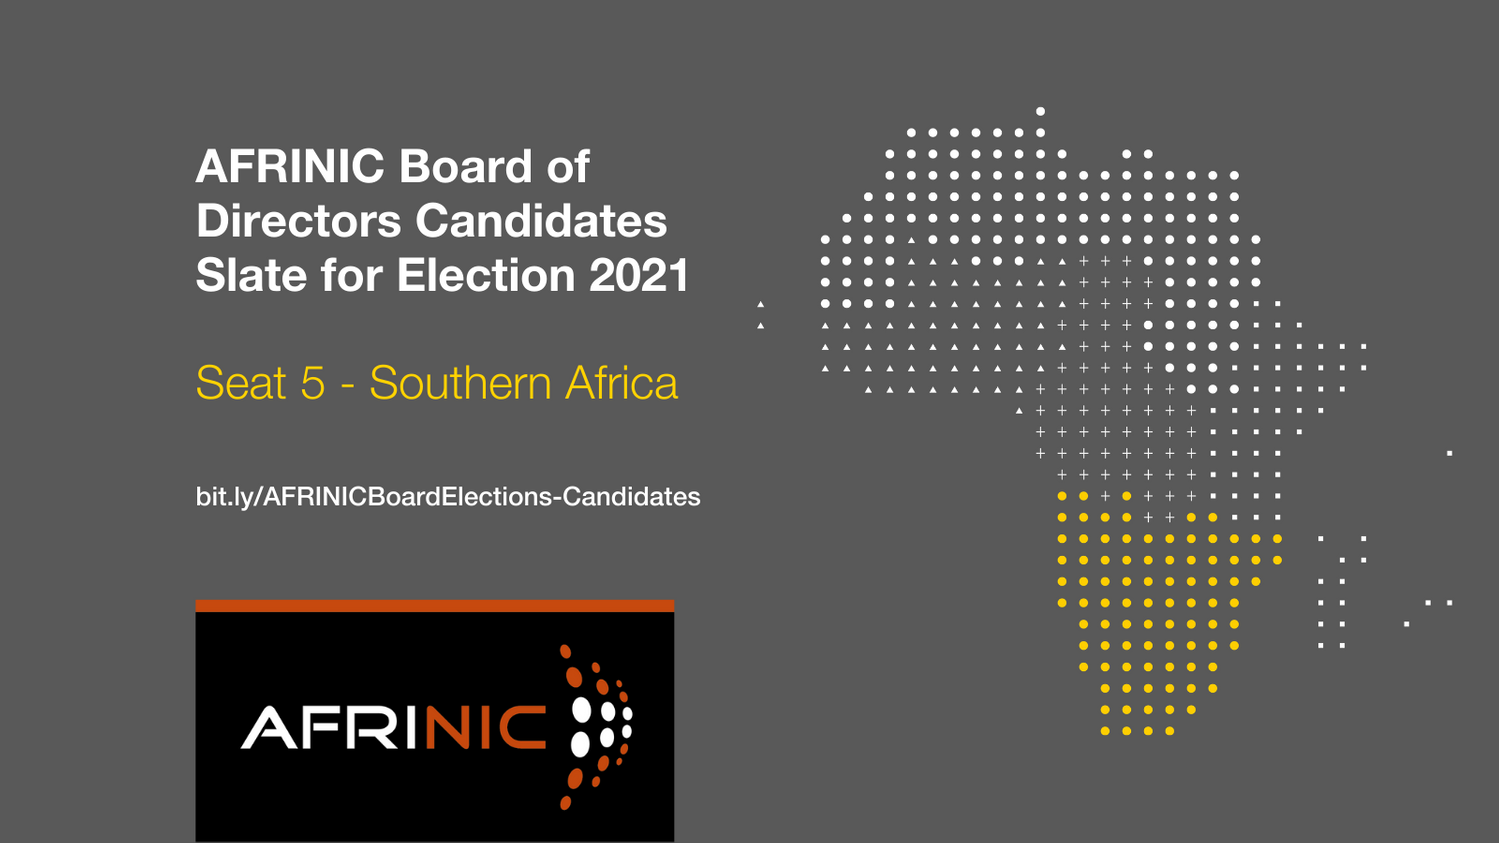 AFRINIC Board of Directors Candidates Slate for Election 2021 — accouncement on social media, image source: AFRINIC FB PAGE